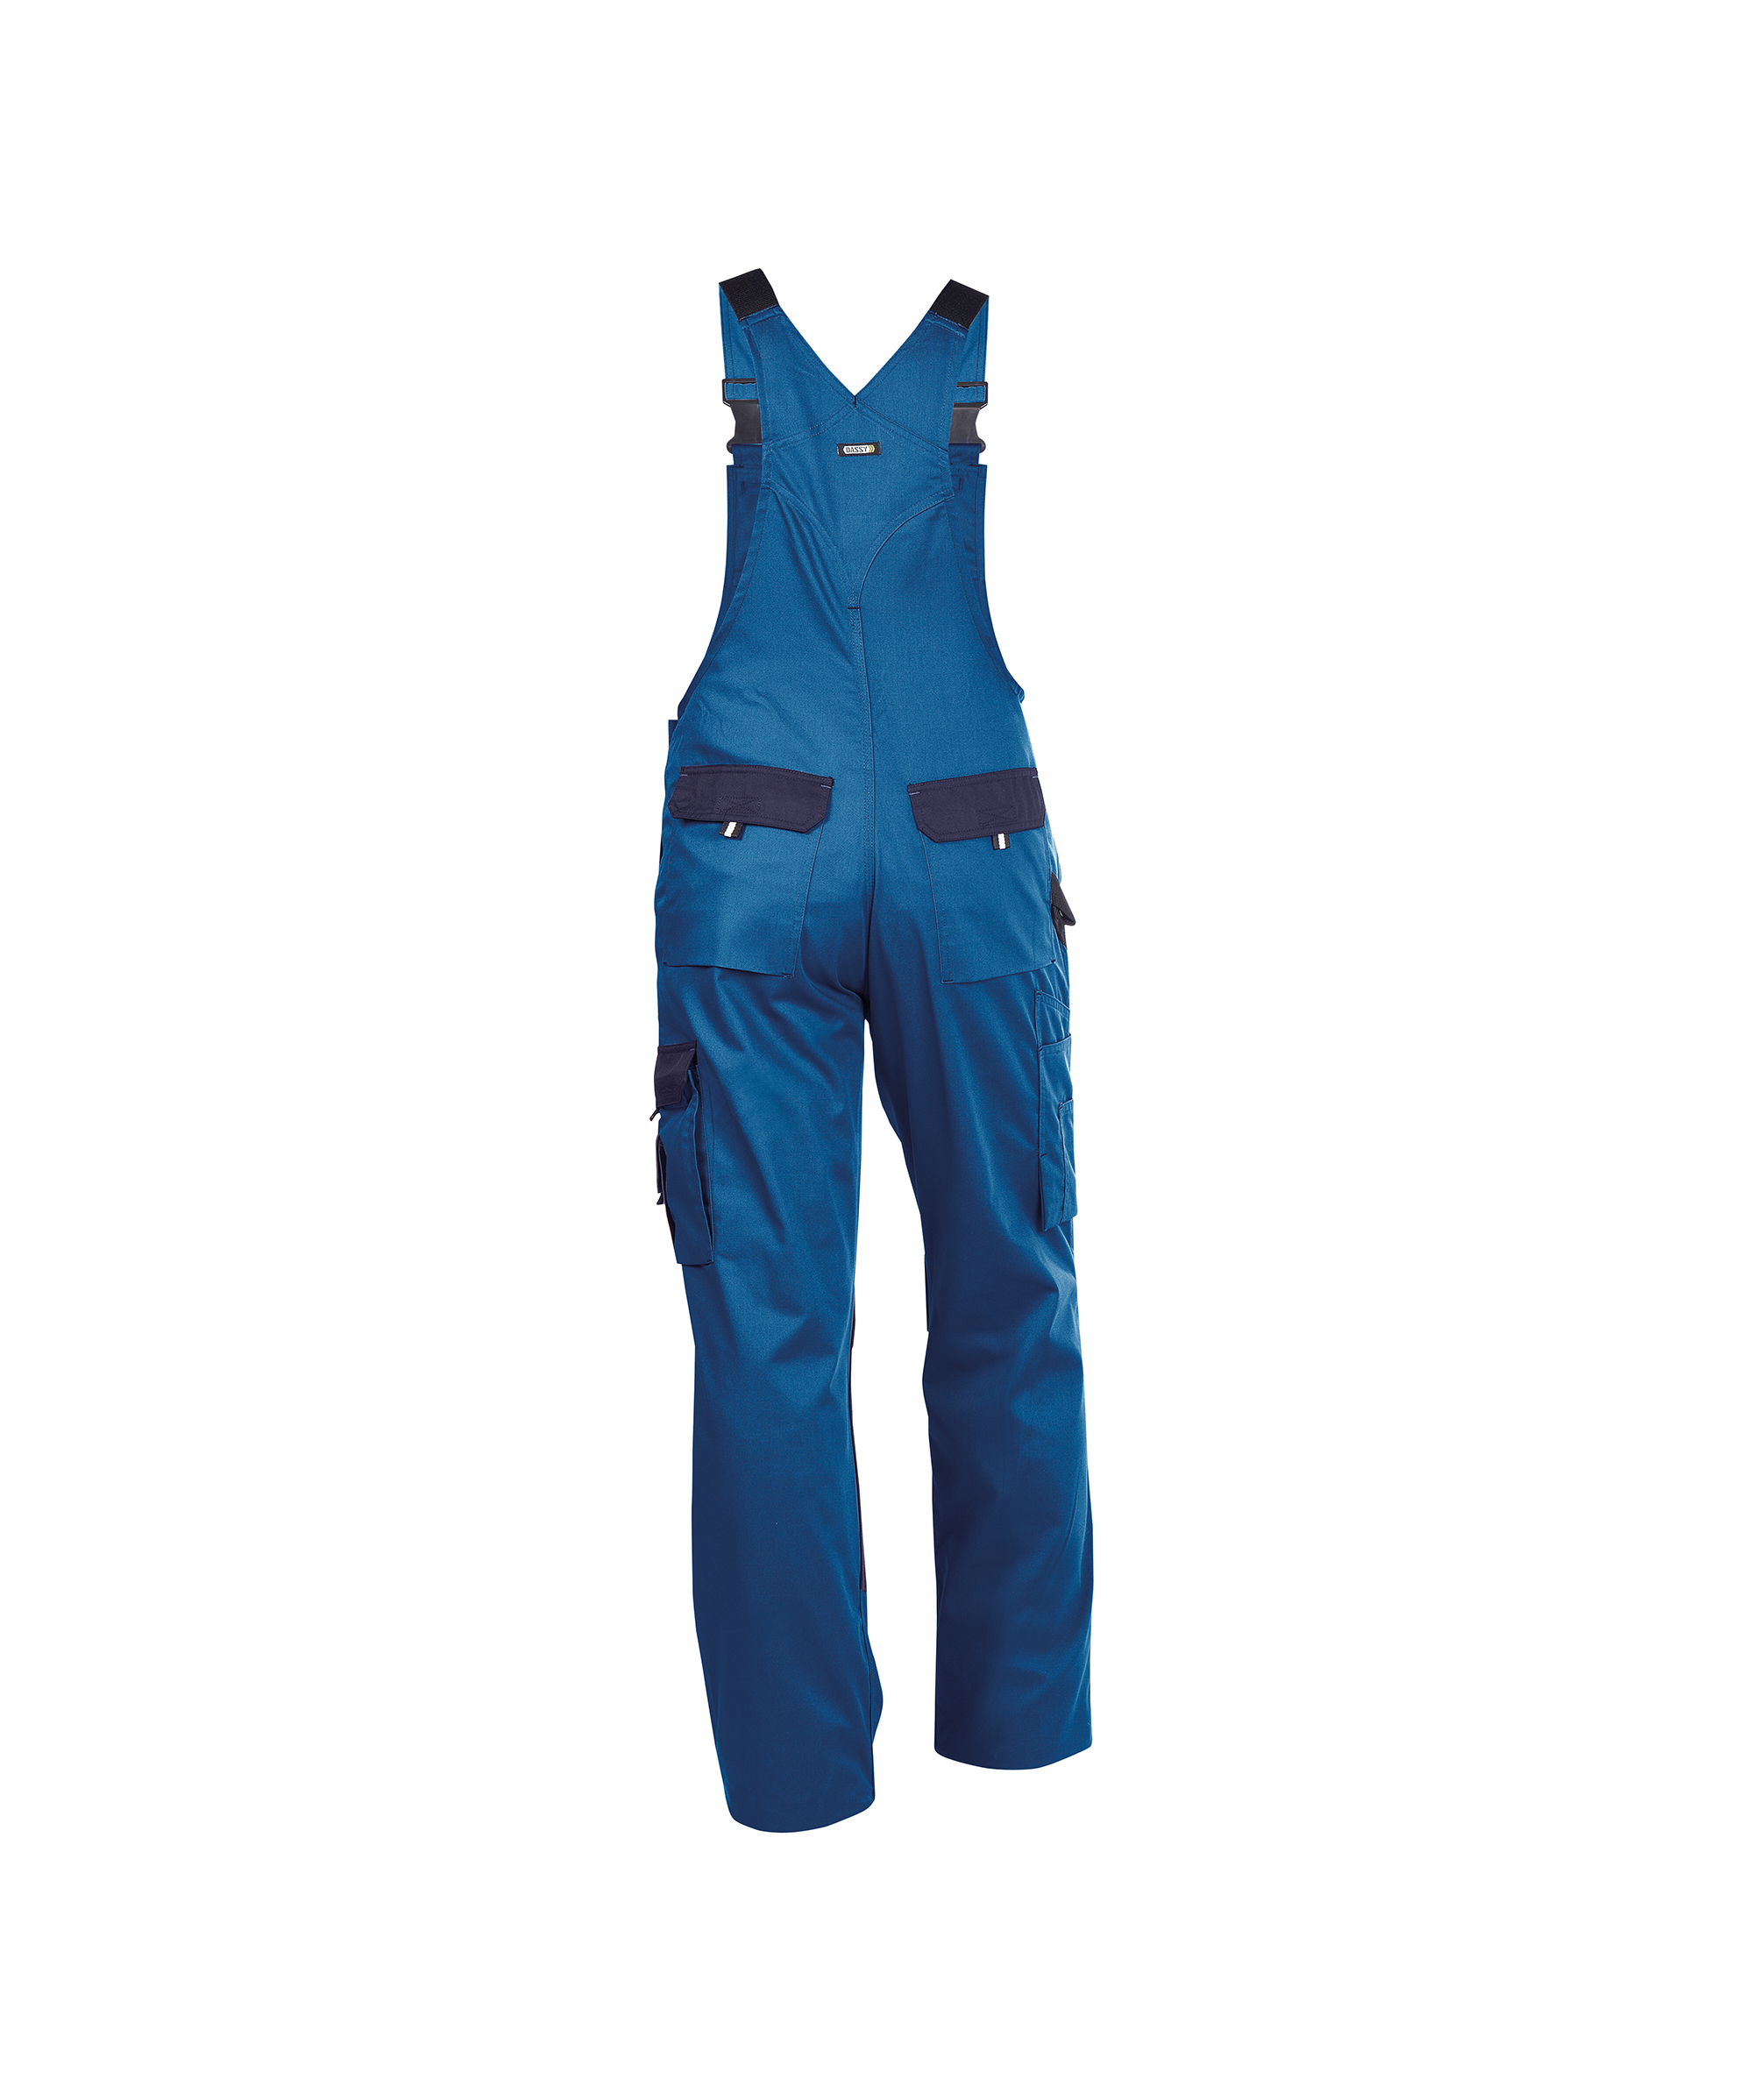 versailles_two-tone-brace-overall-with-knee-pockets_royal-blue-navy_back.jpg